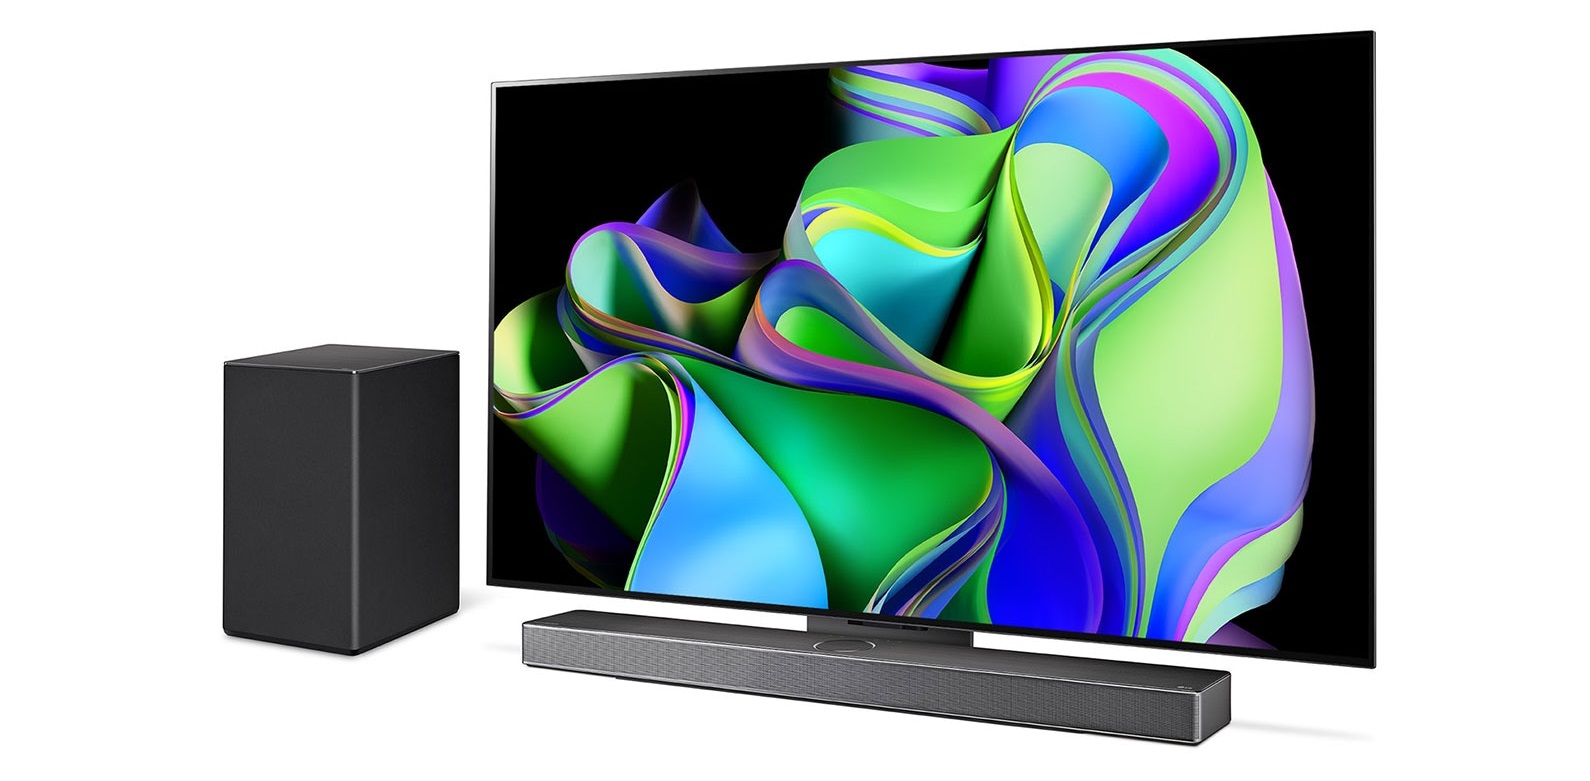 LG launches SC9S 400W soundbar with IMAX Enhanced certification for $1000